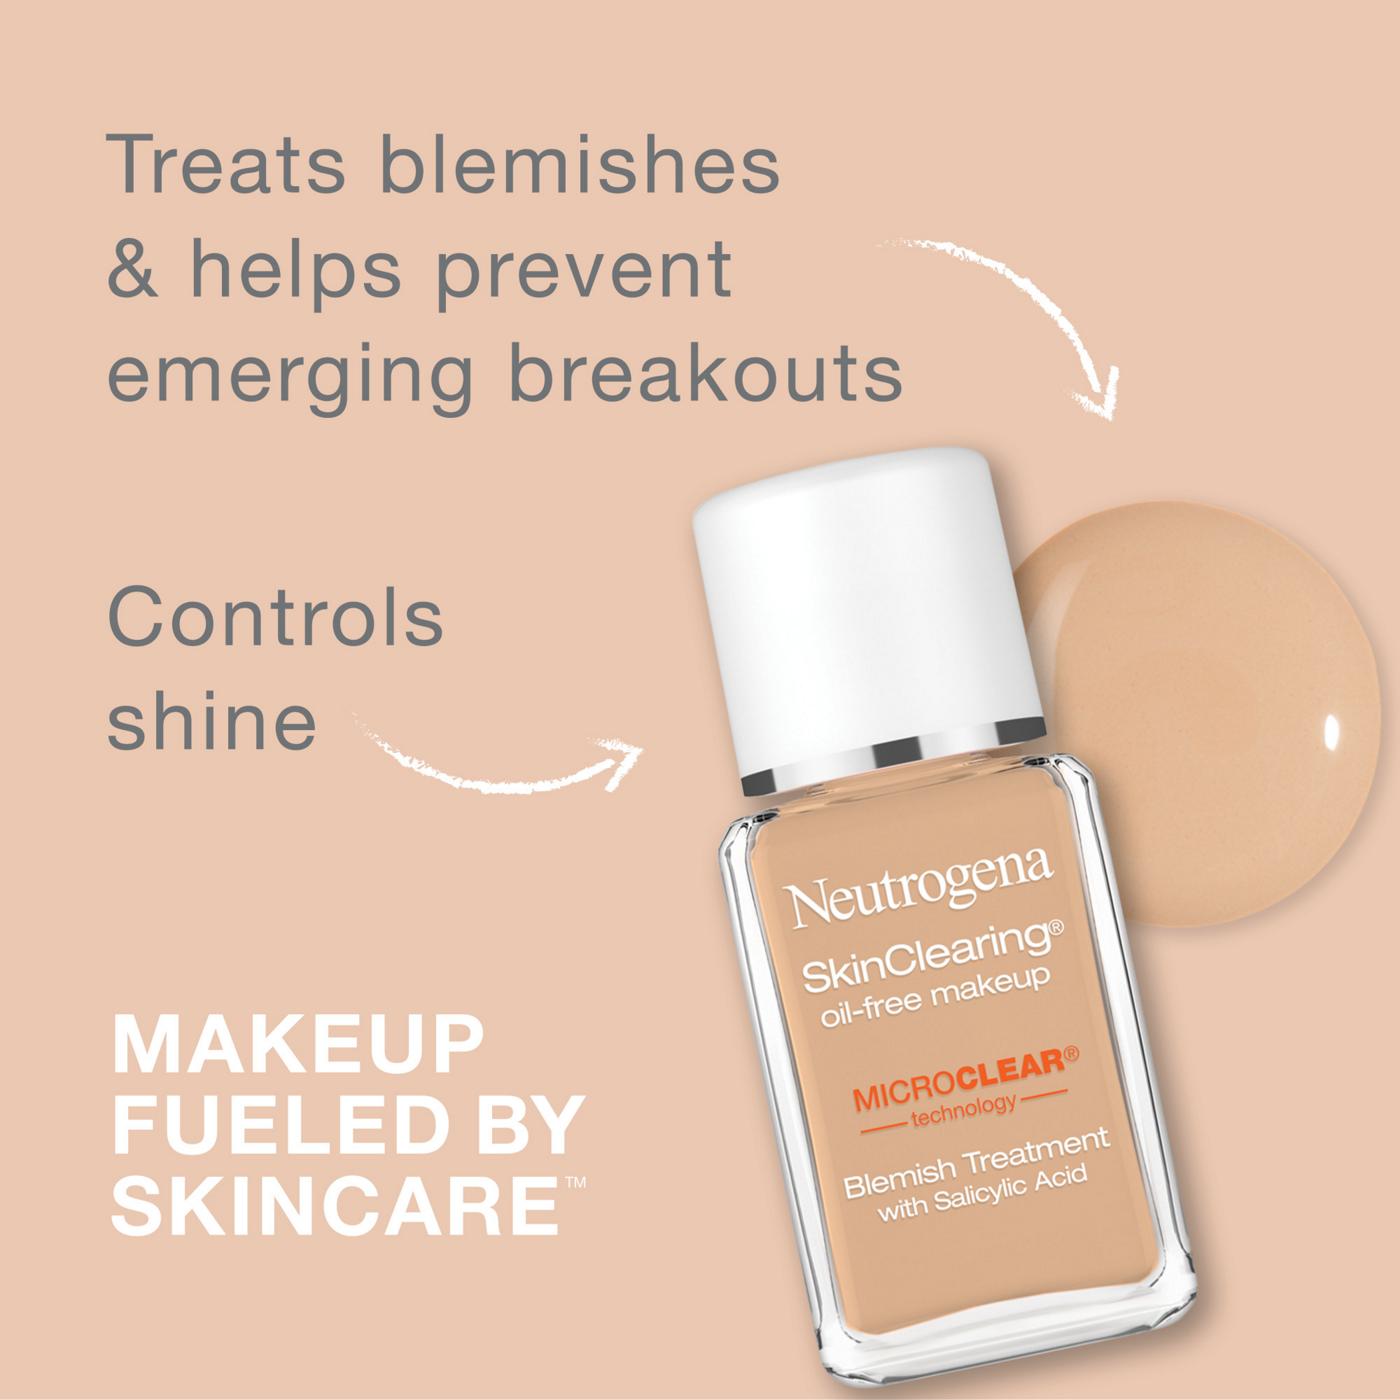 Neutrogena SkinClearing 10 Classic Ivory Oil-Free Makeup; image 6 of 8